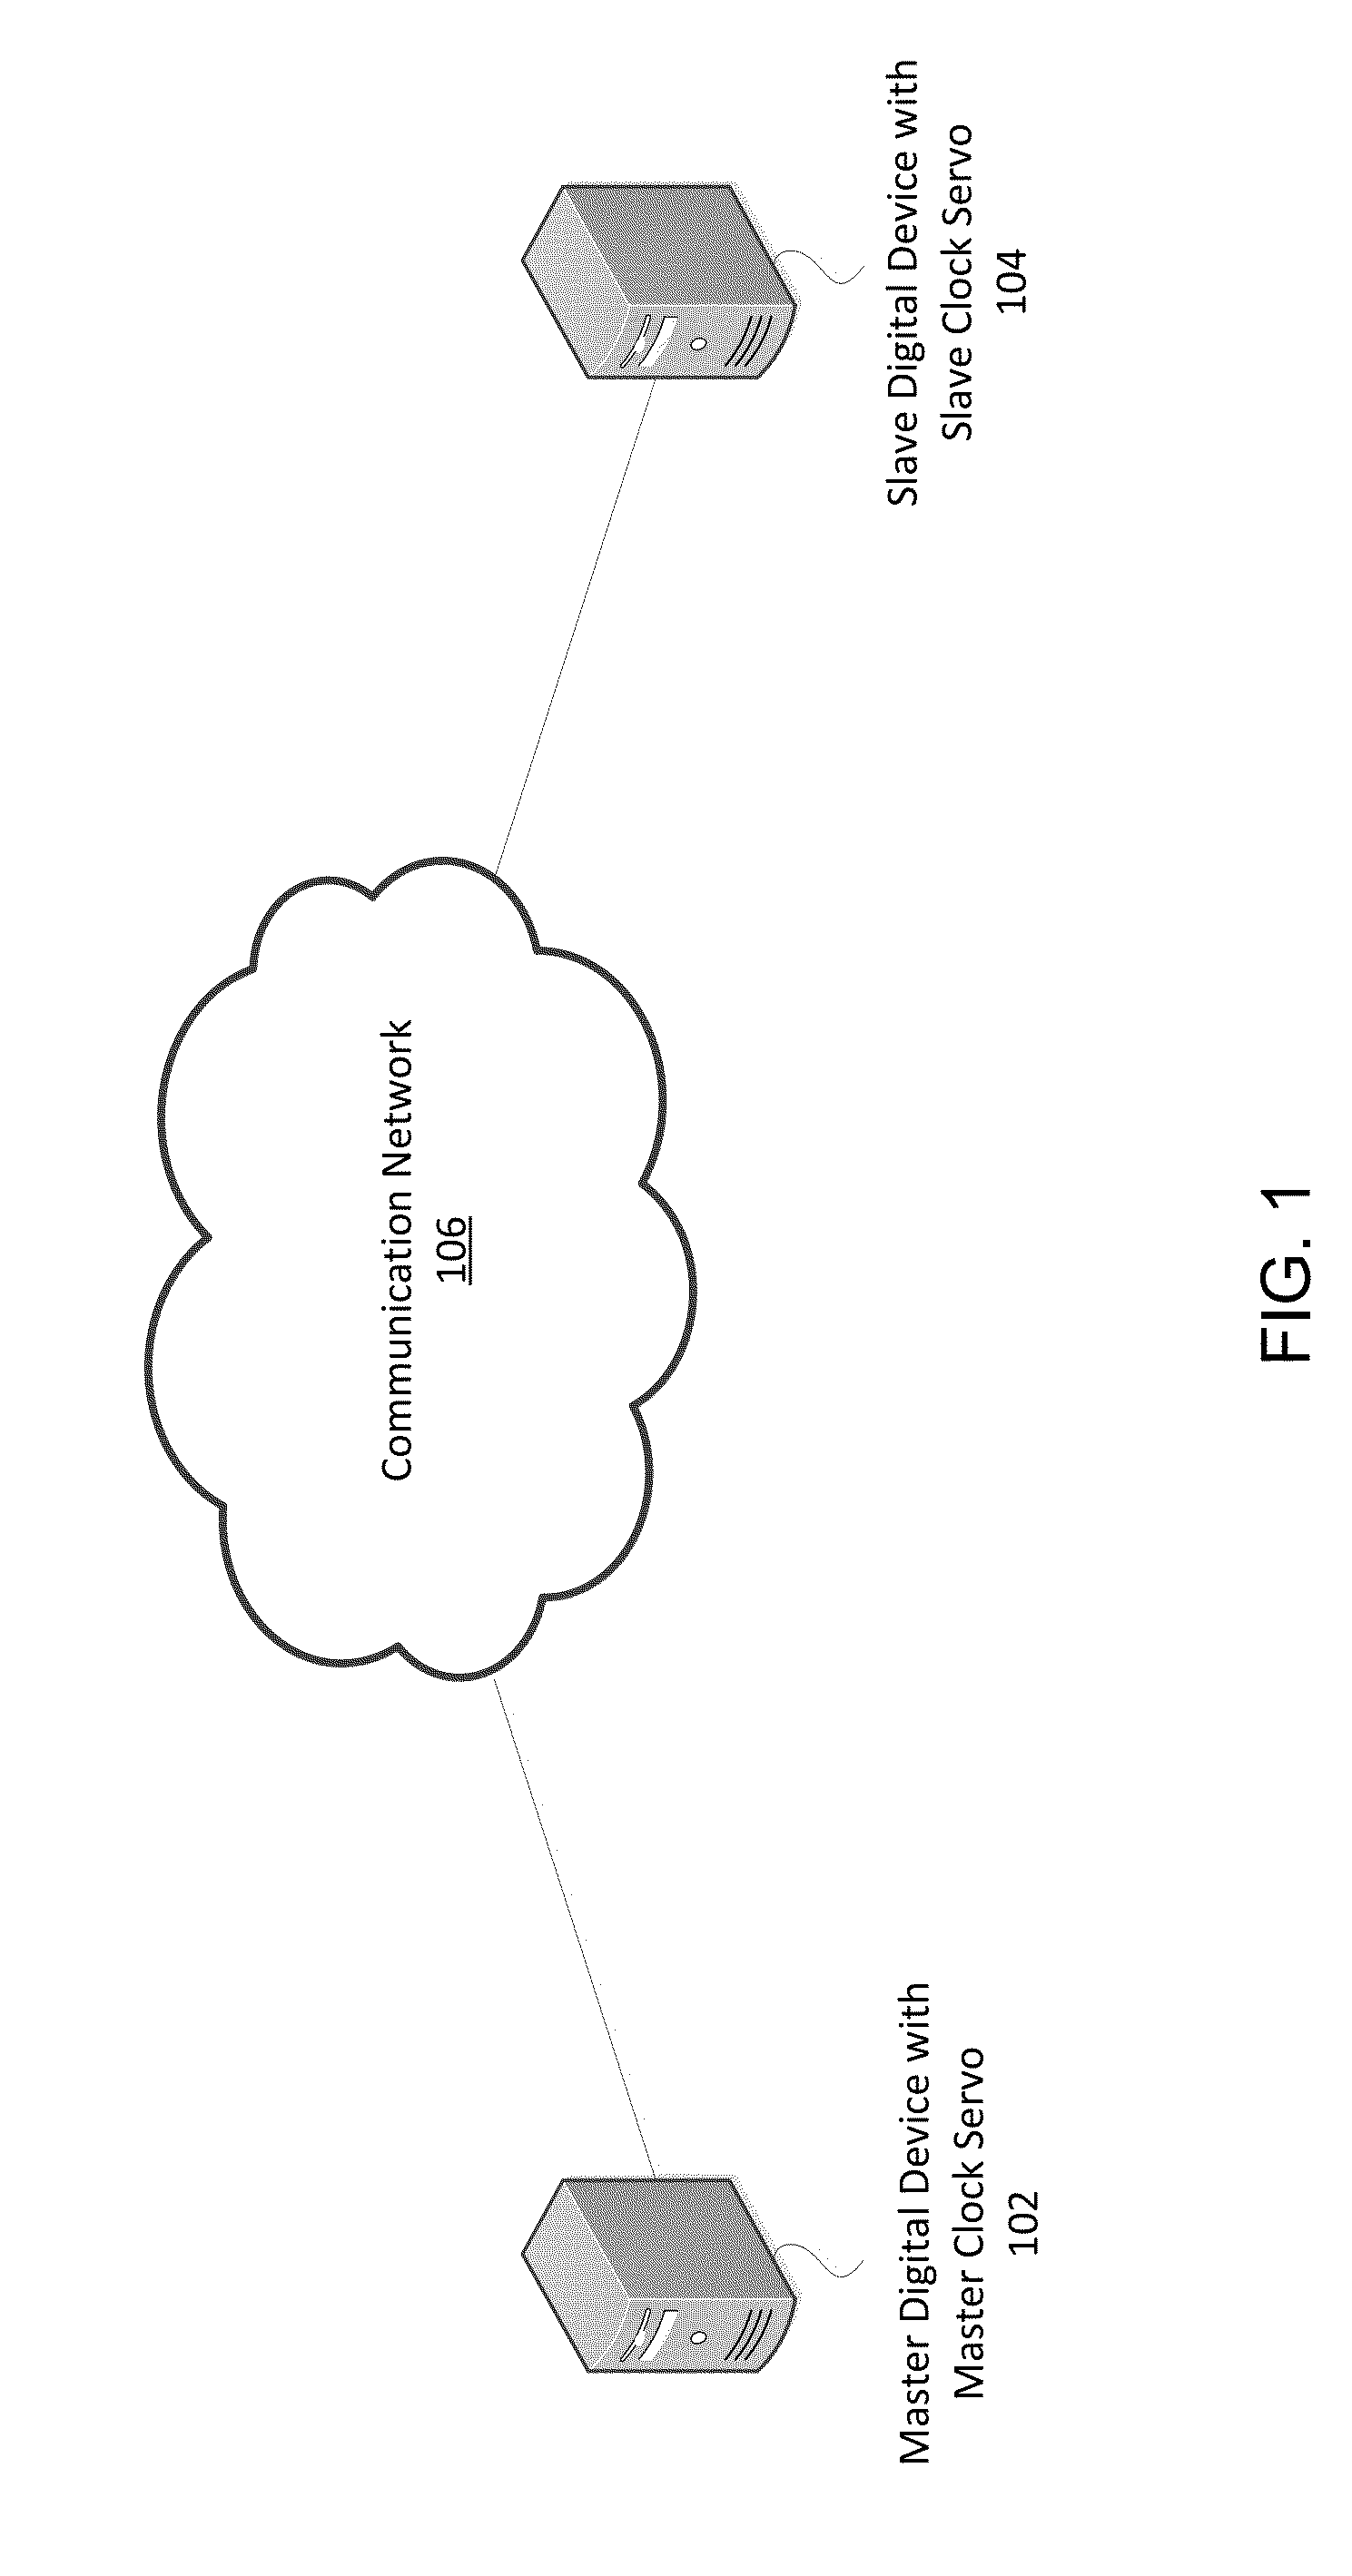 Systems and Methods of Network Synchronization